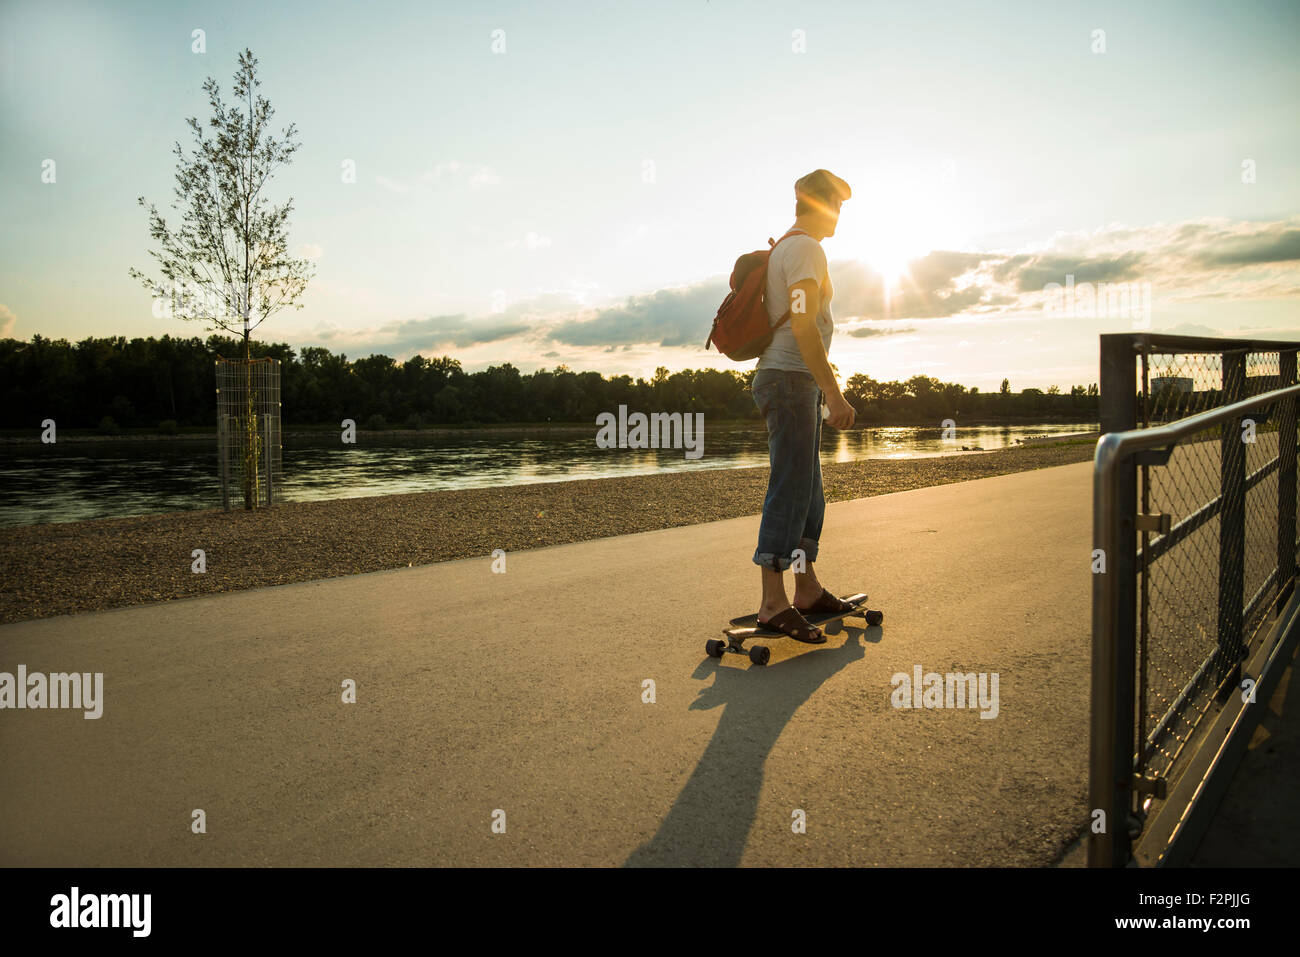 Man standing on skateboard in the evening twilight Stock Photo